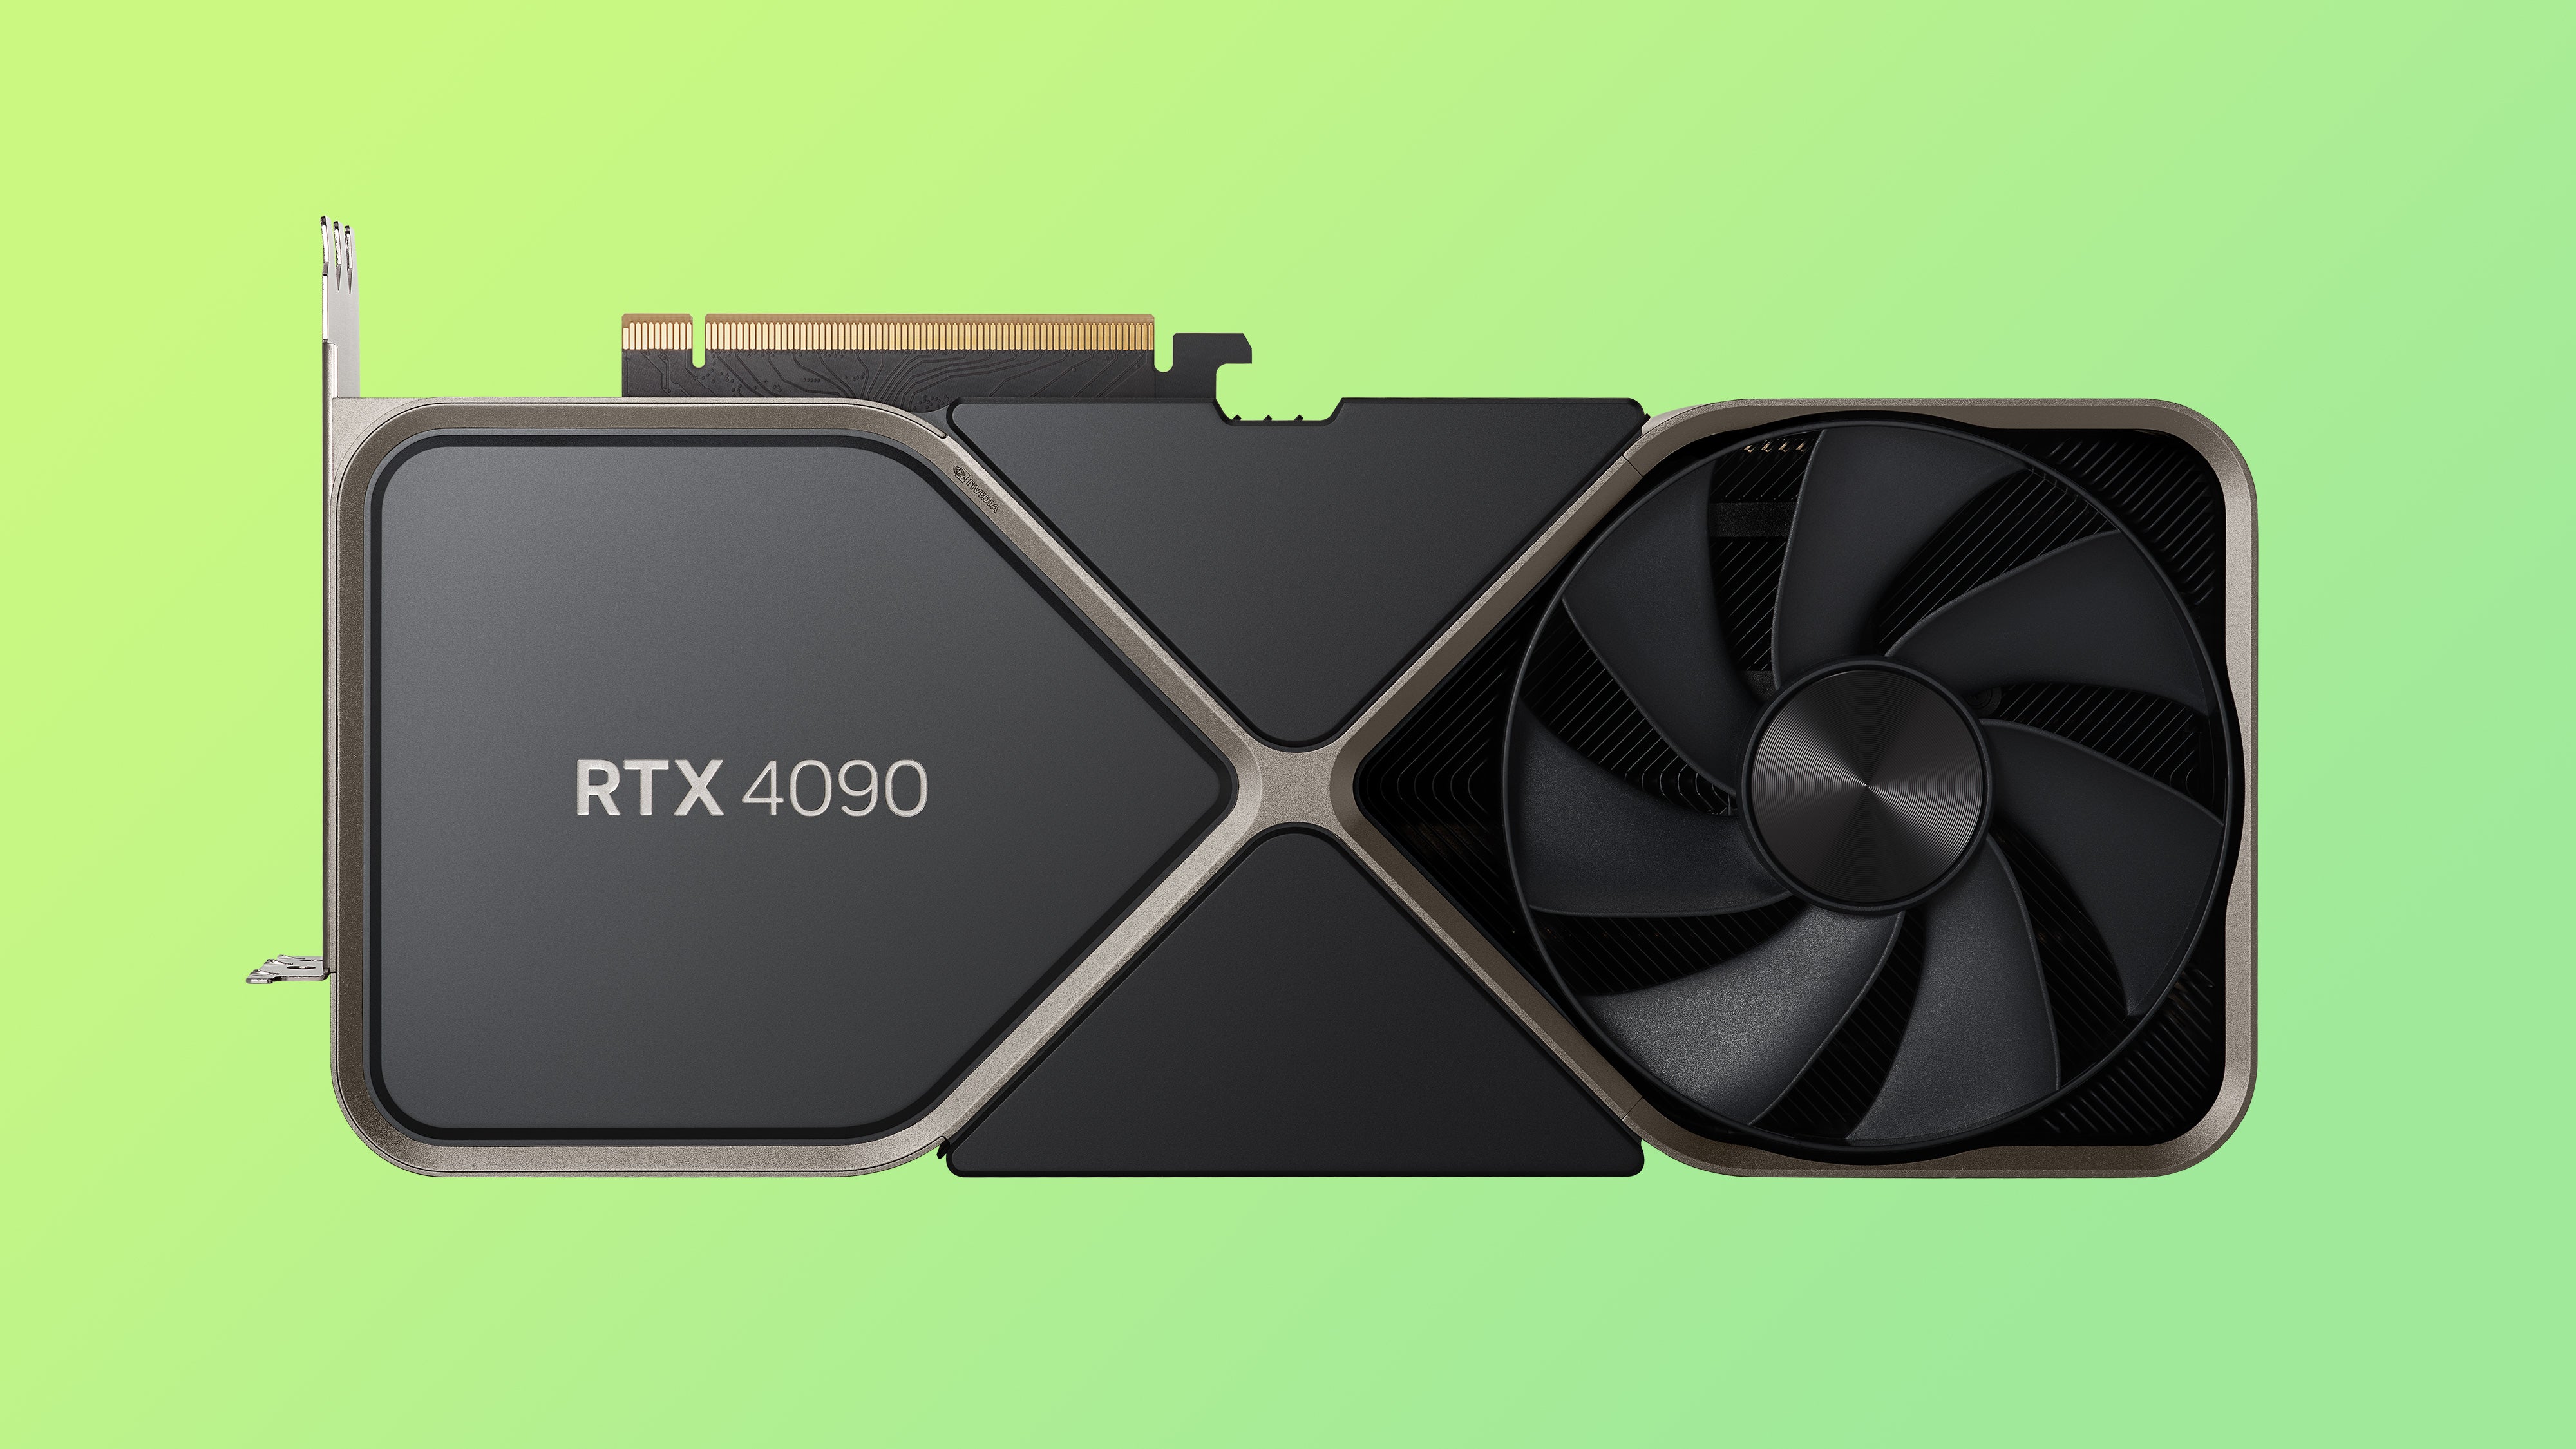 Falling GPU prices are thing of "the past", Nvidia says